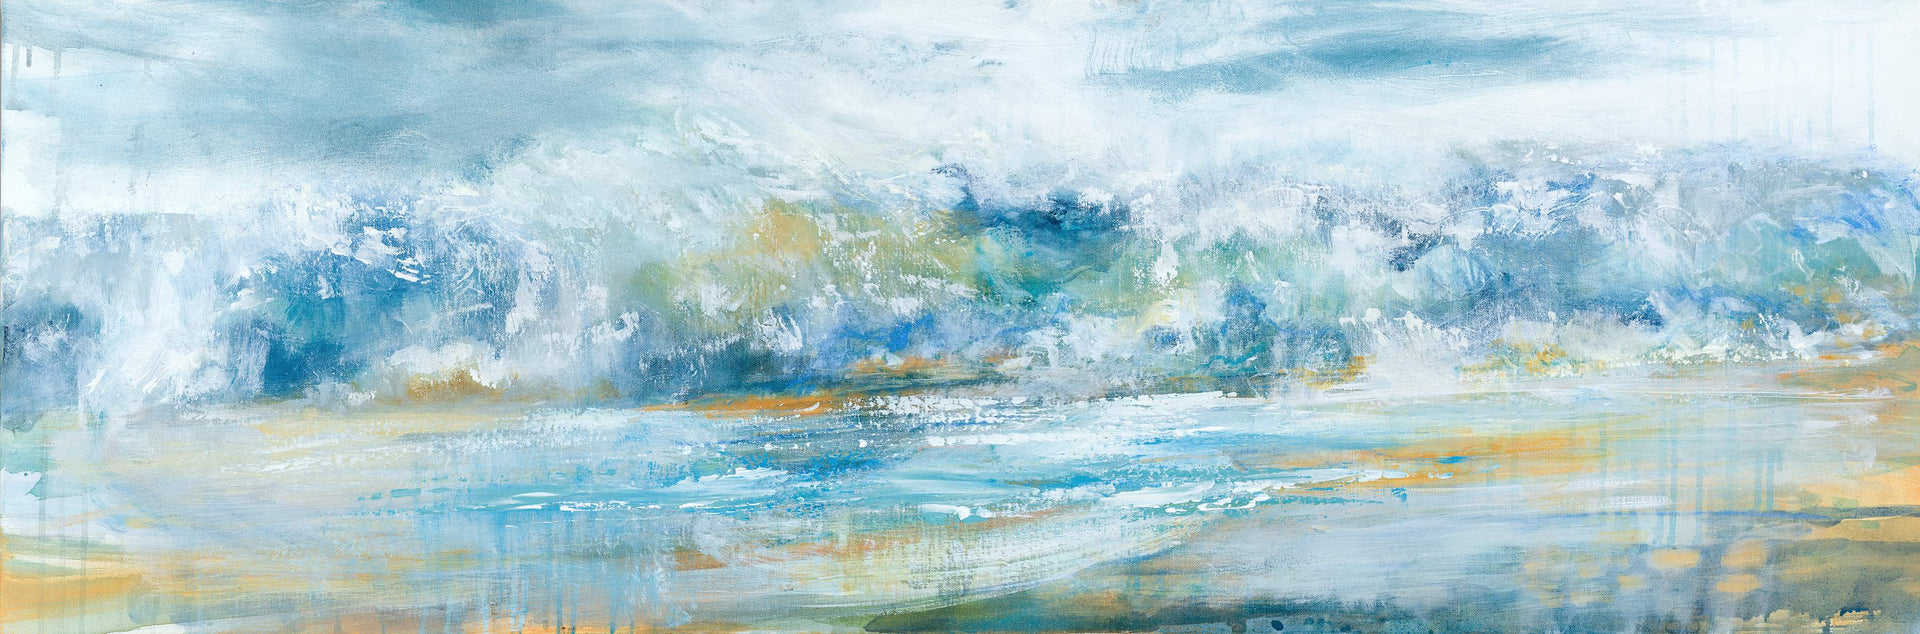 Long wave seascape painting with wet sand